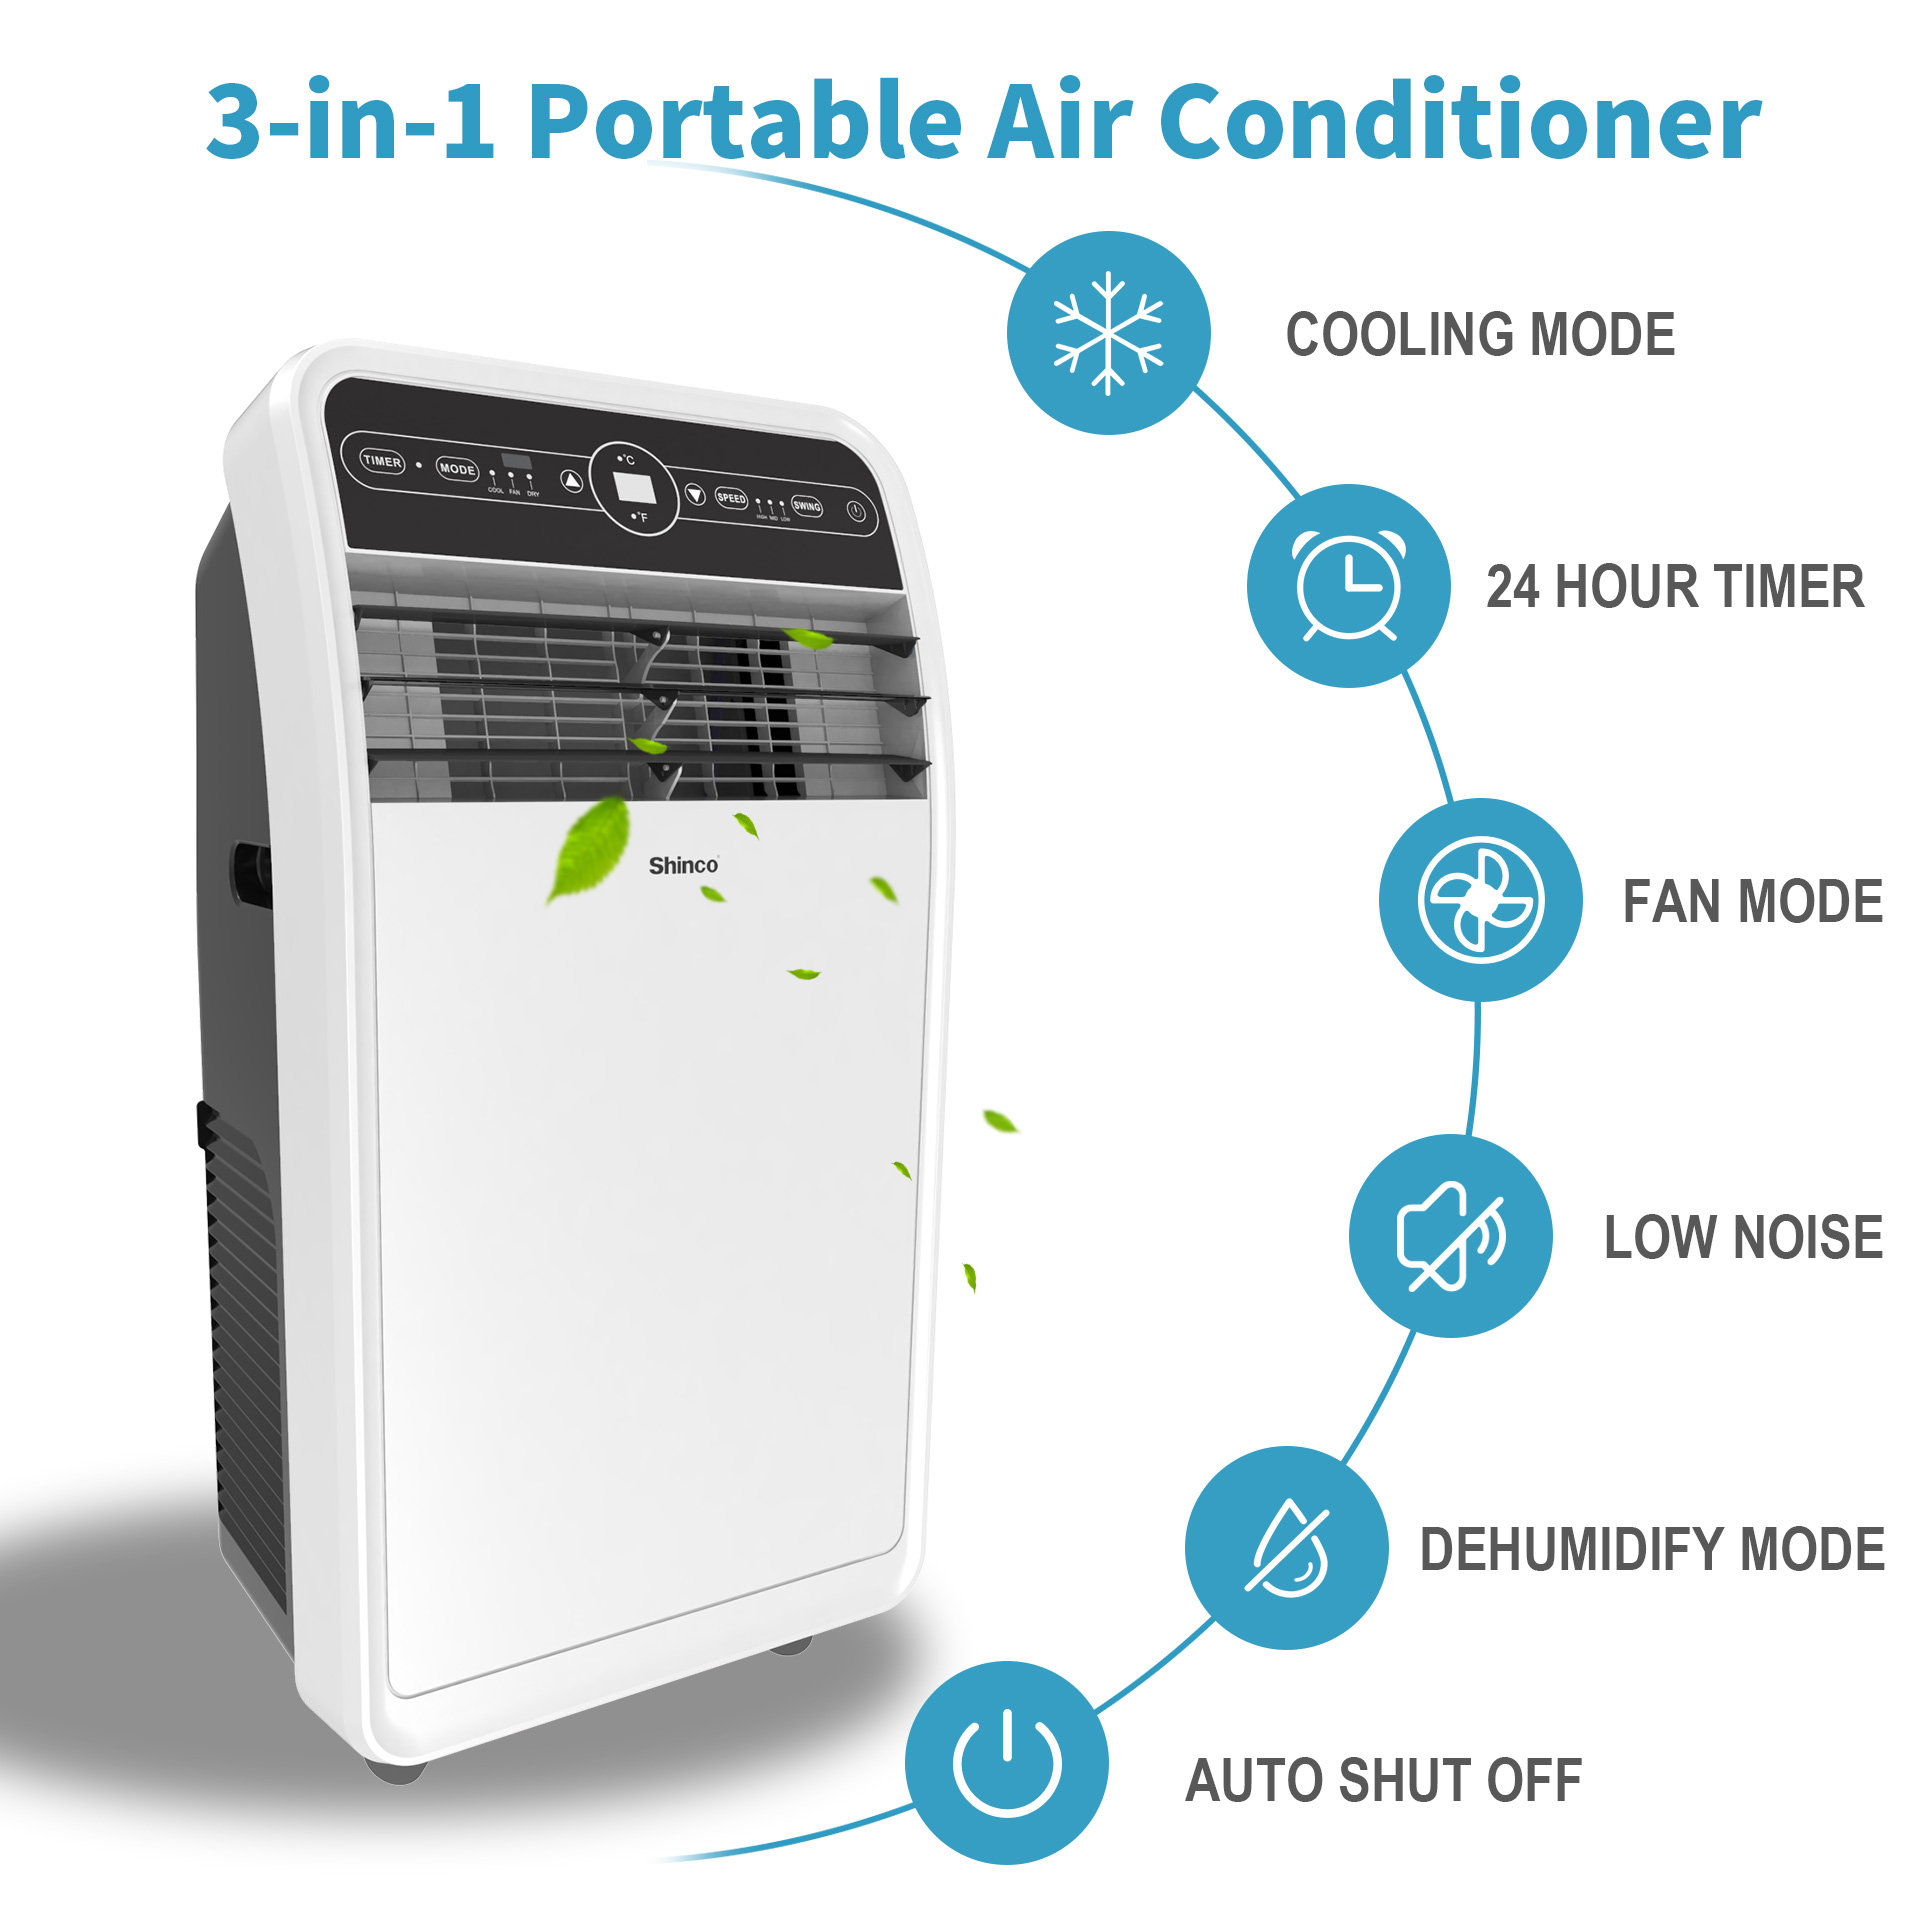 Can portable ac units operate in a fan-only mode